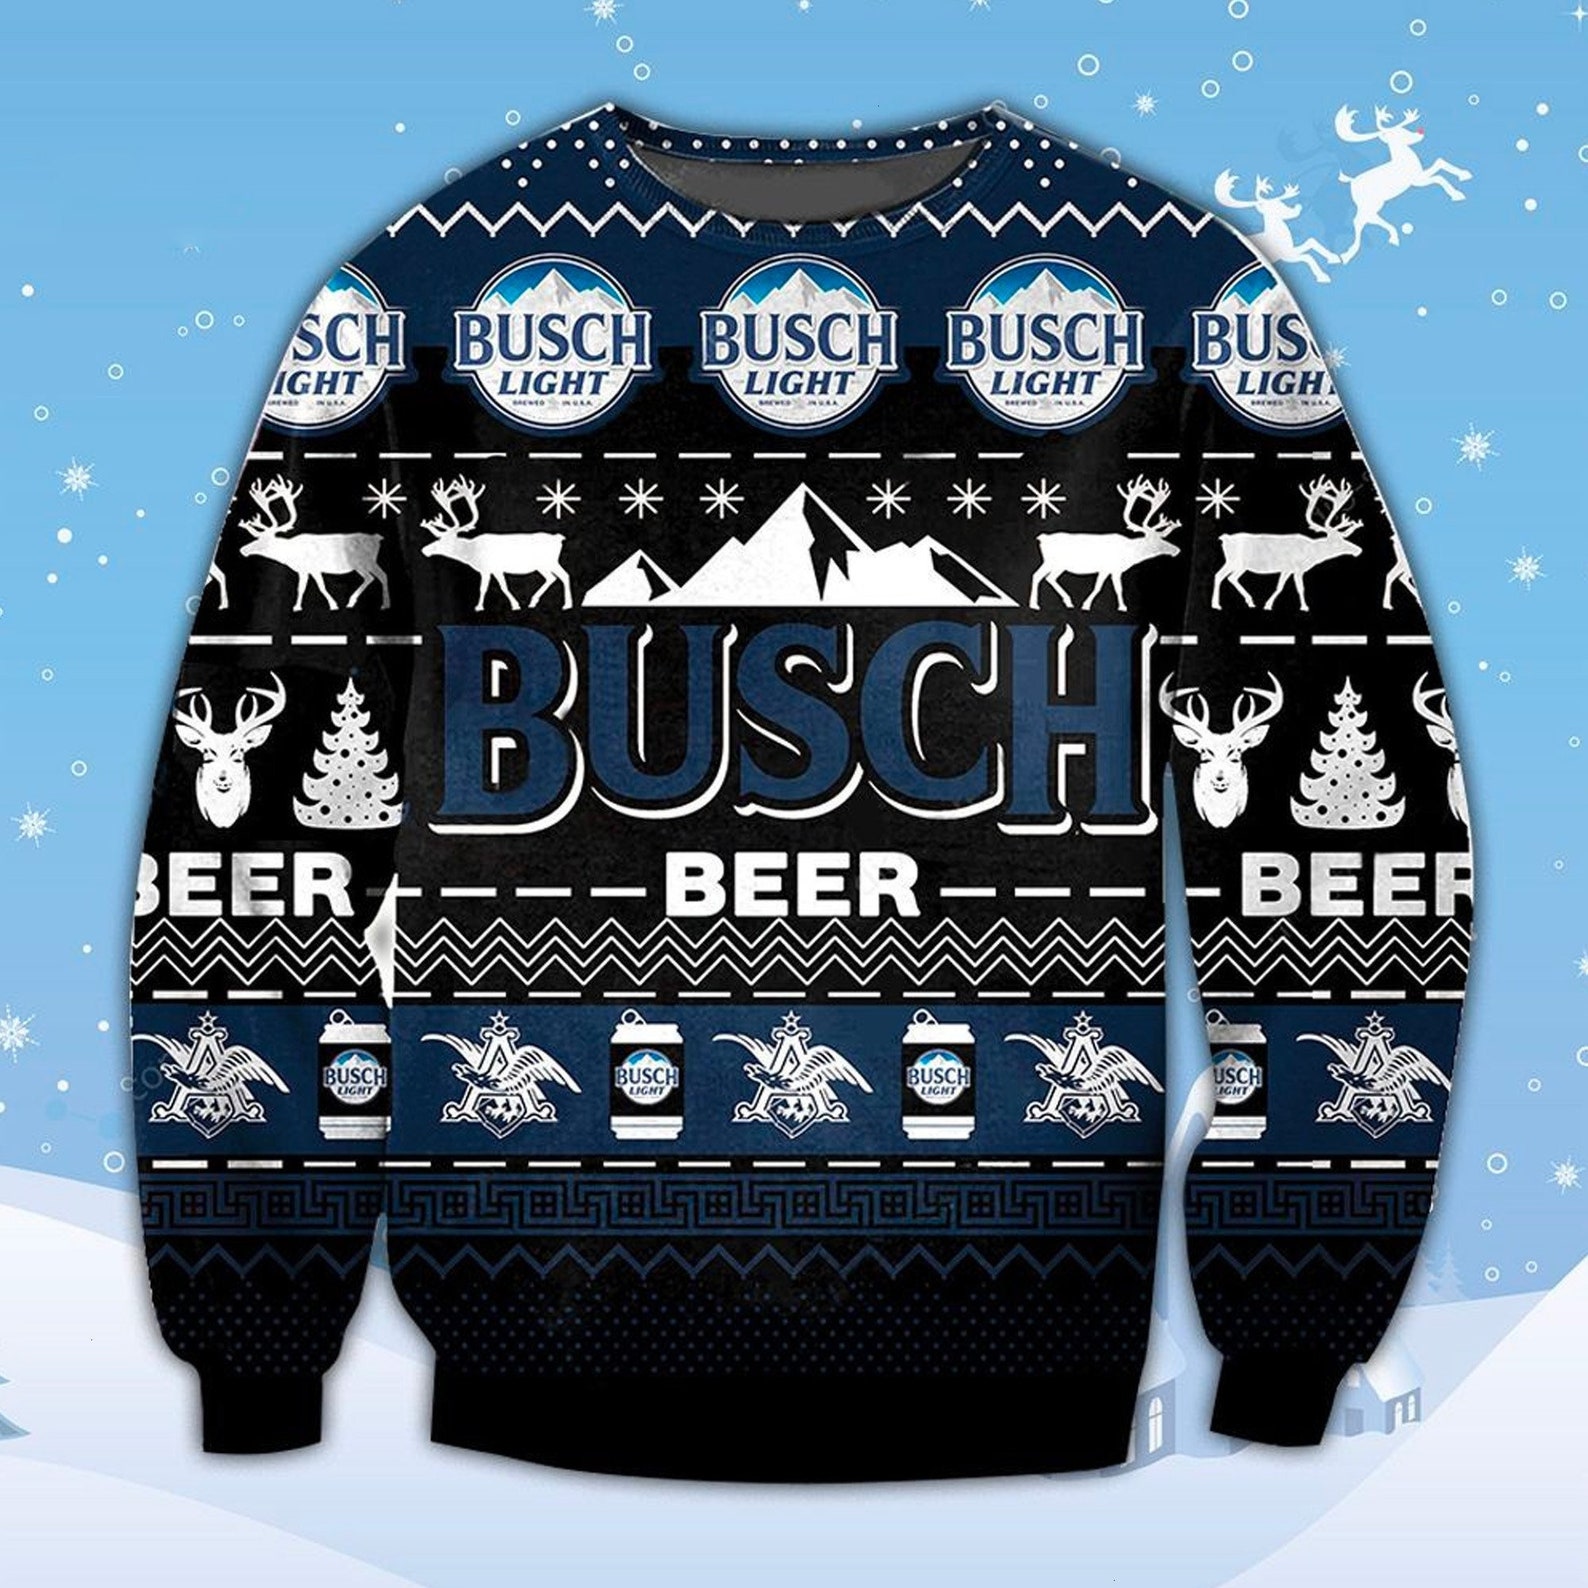 Busch Light Merry Christmas Ugly Sweater - Perfect Gift for Busch Light & Beer Lovers this Xmas